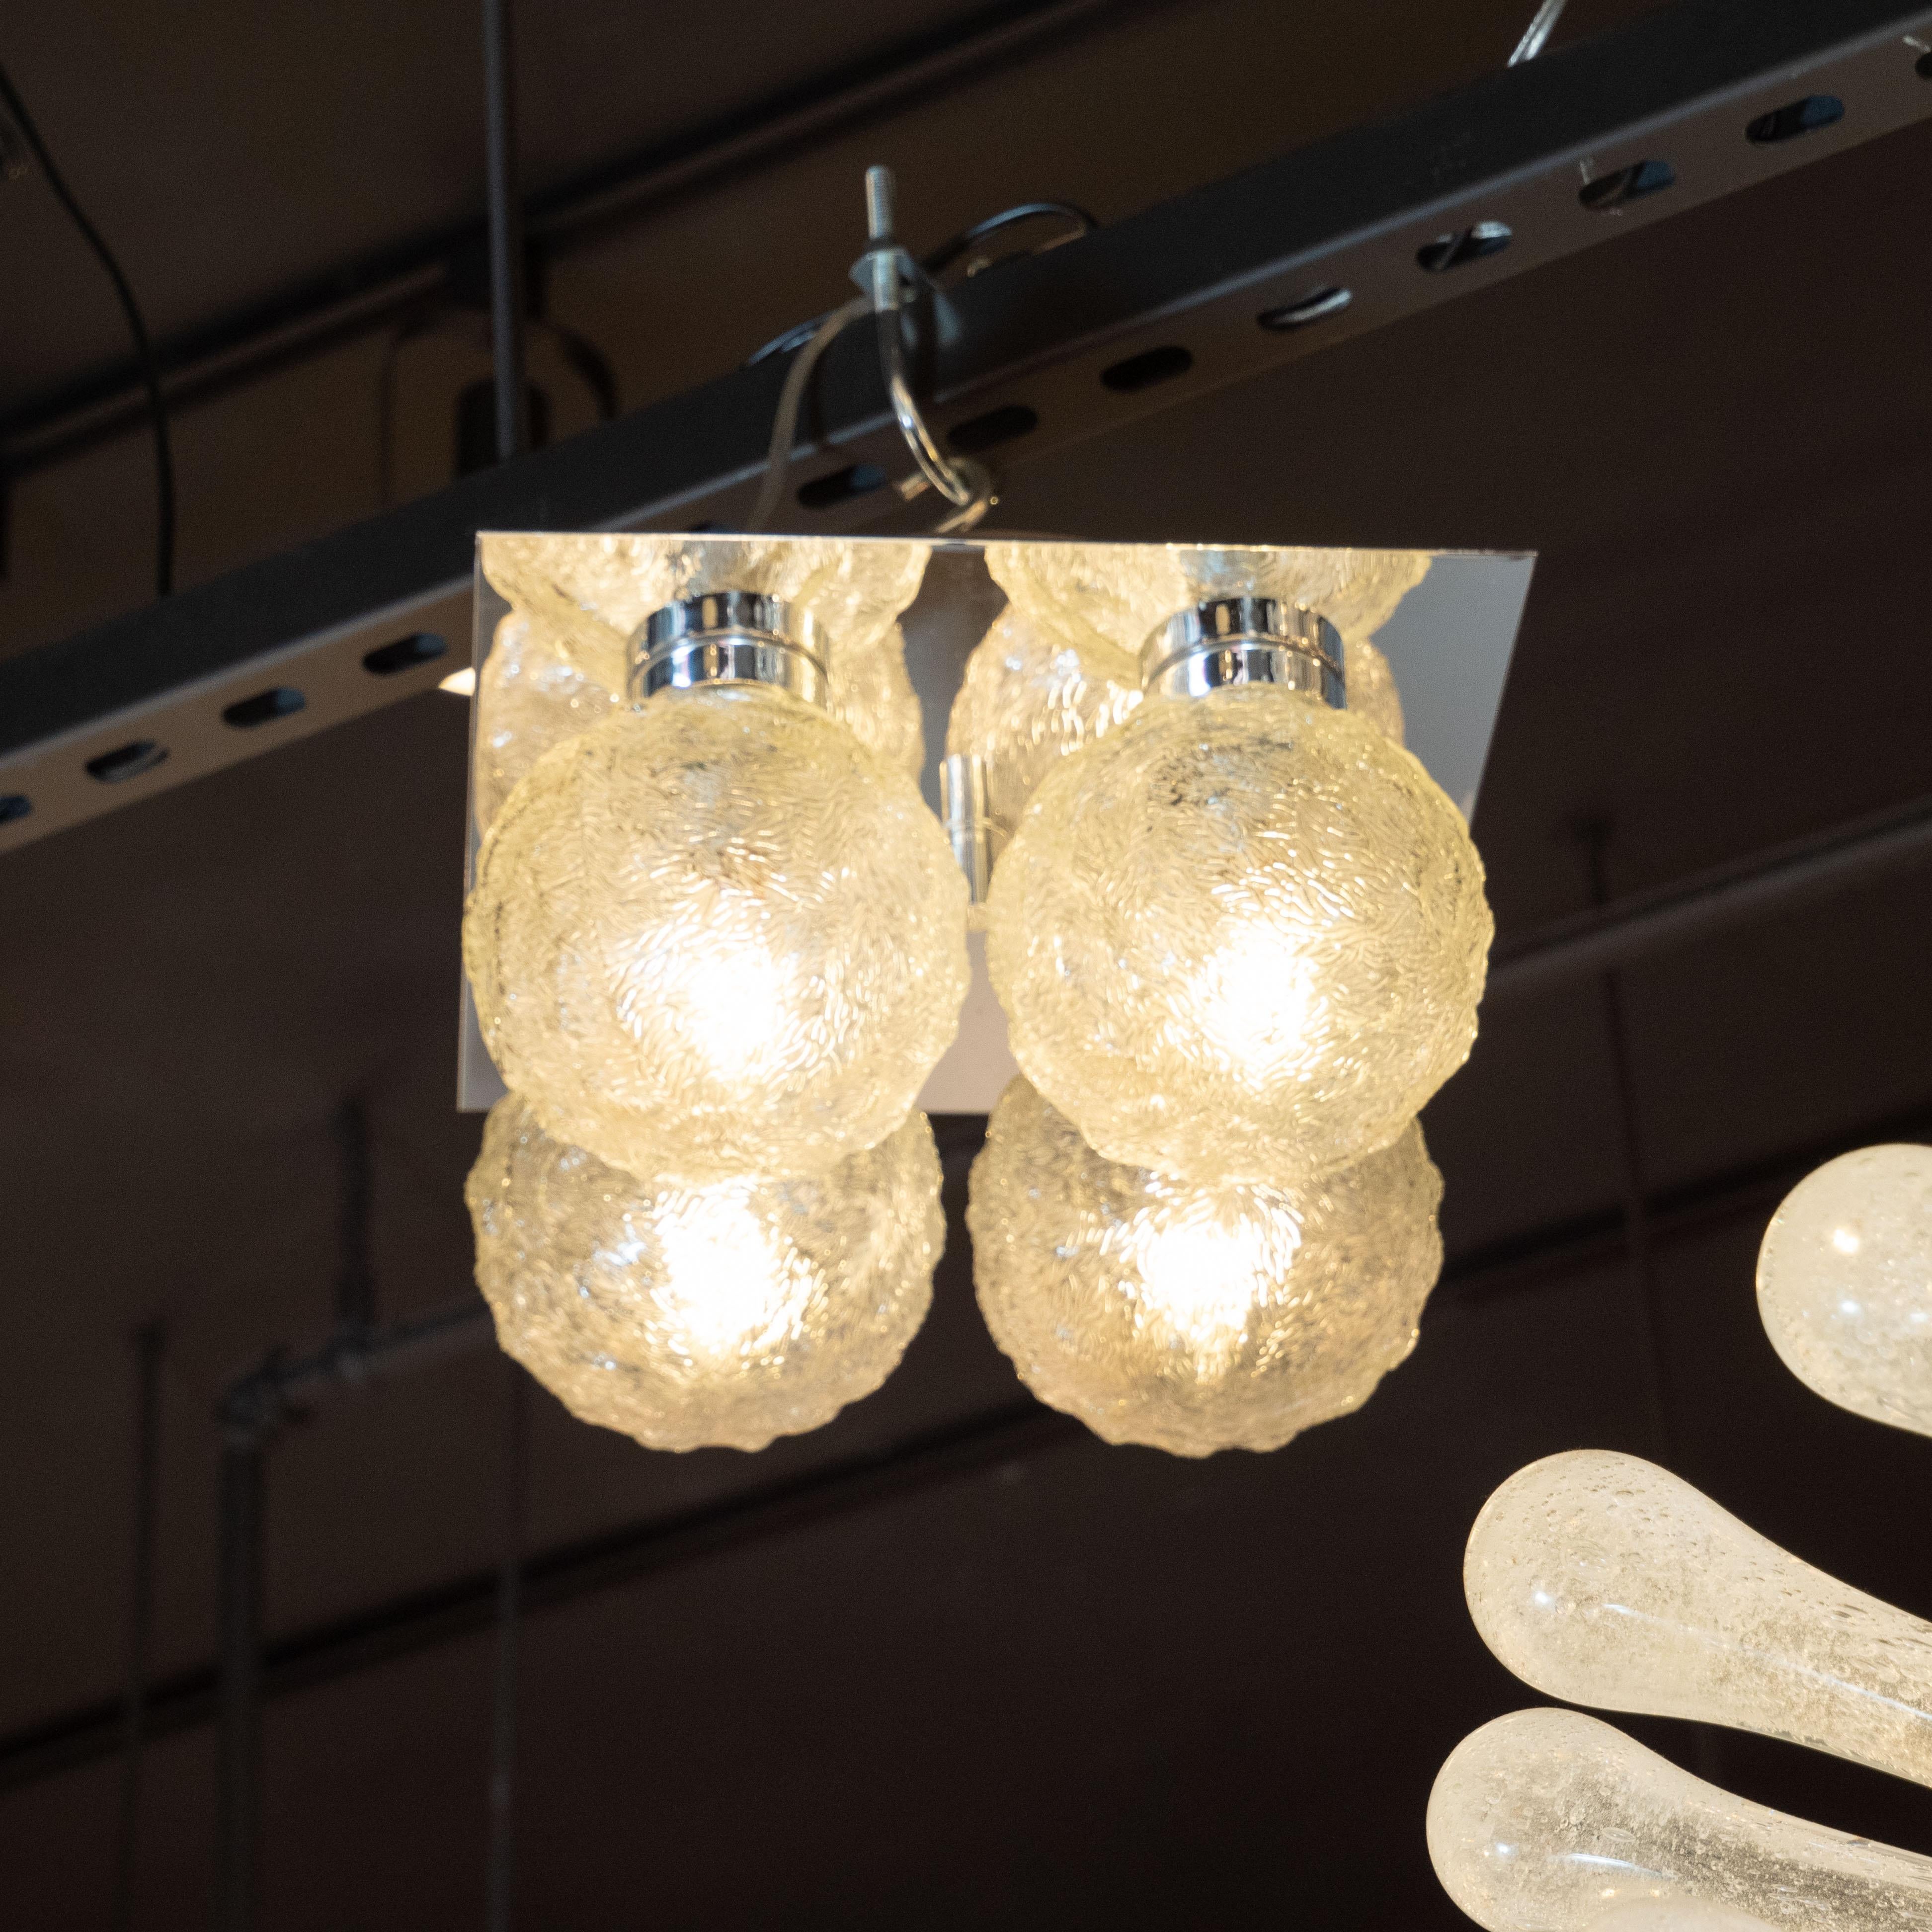 This elegant Mid-Century Modern flush mount chandelier was realized in Germany, circa 1960. It features four spherical shades in textured translucent glass- each with an abundance of organic curvilinear striations etched into the surface. The